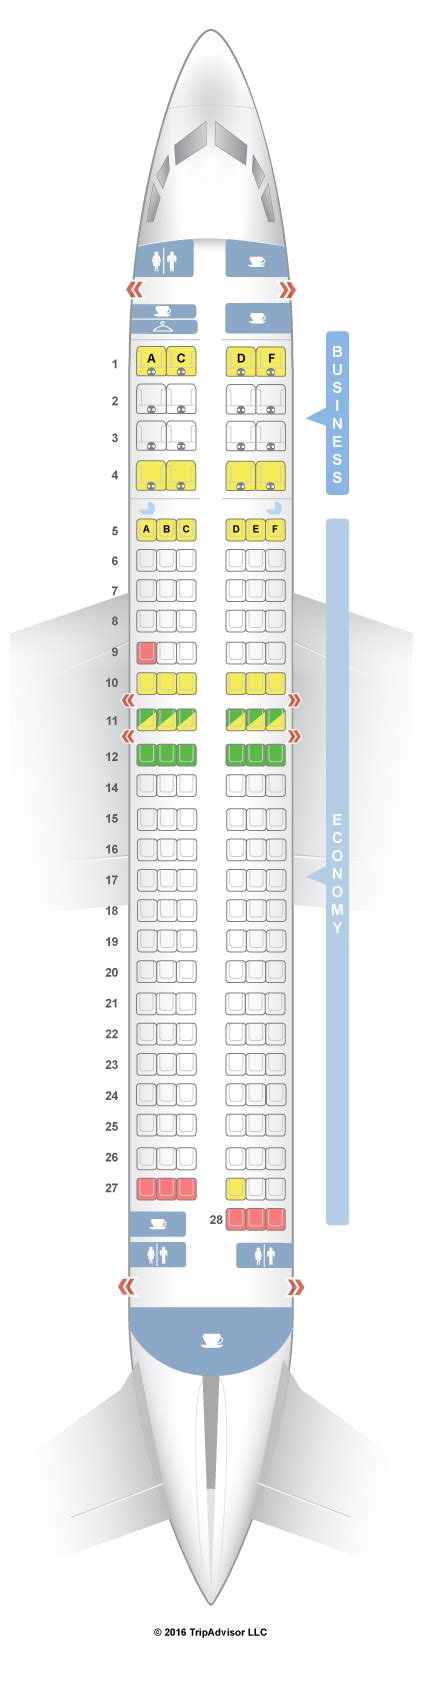 Turkish Airlines Seat Map Maps Database Source